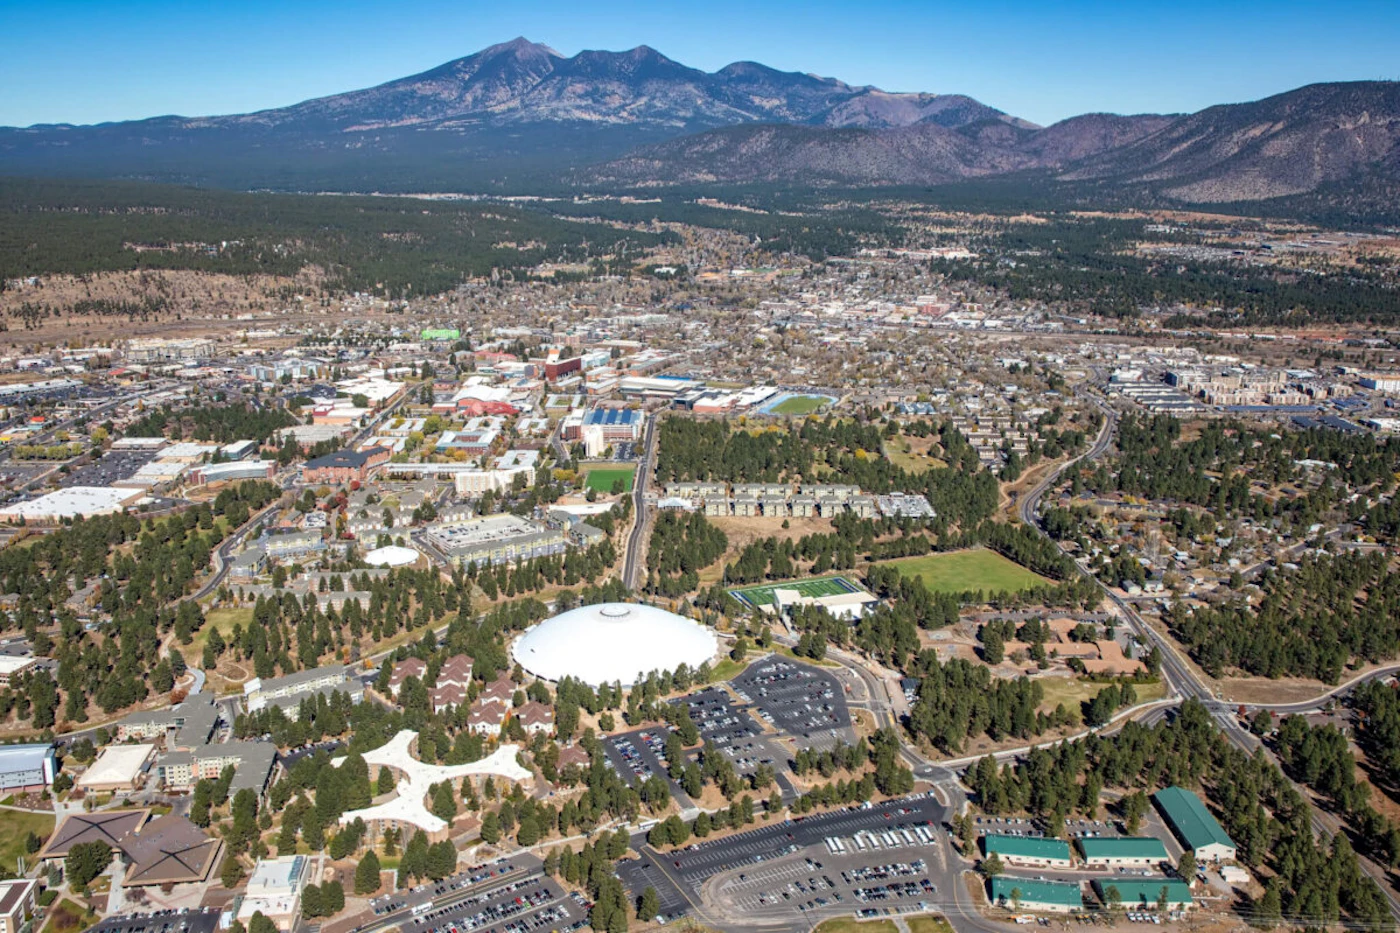 Flagstaff viewed from above in 2021 (Shutterstock Photo/Tim Roberts Photography)